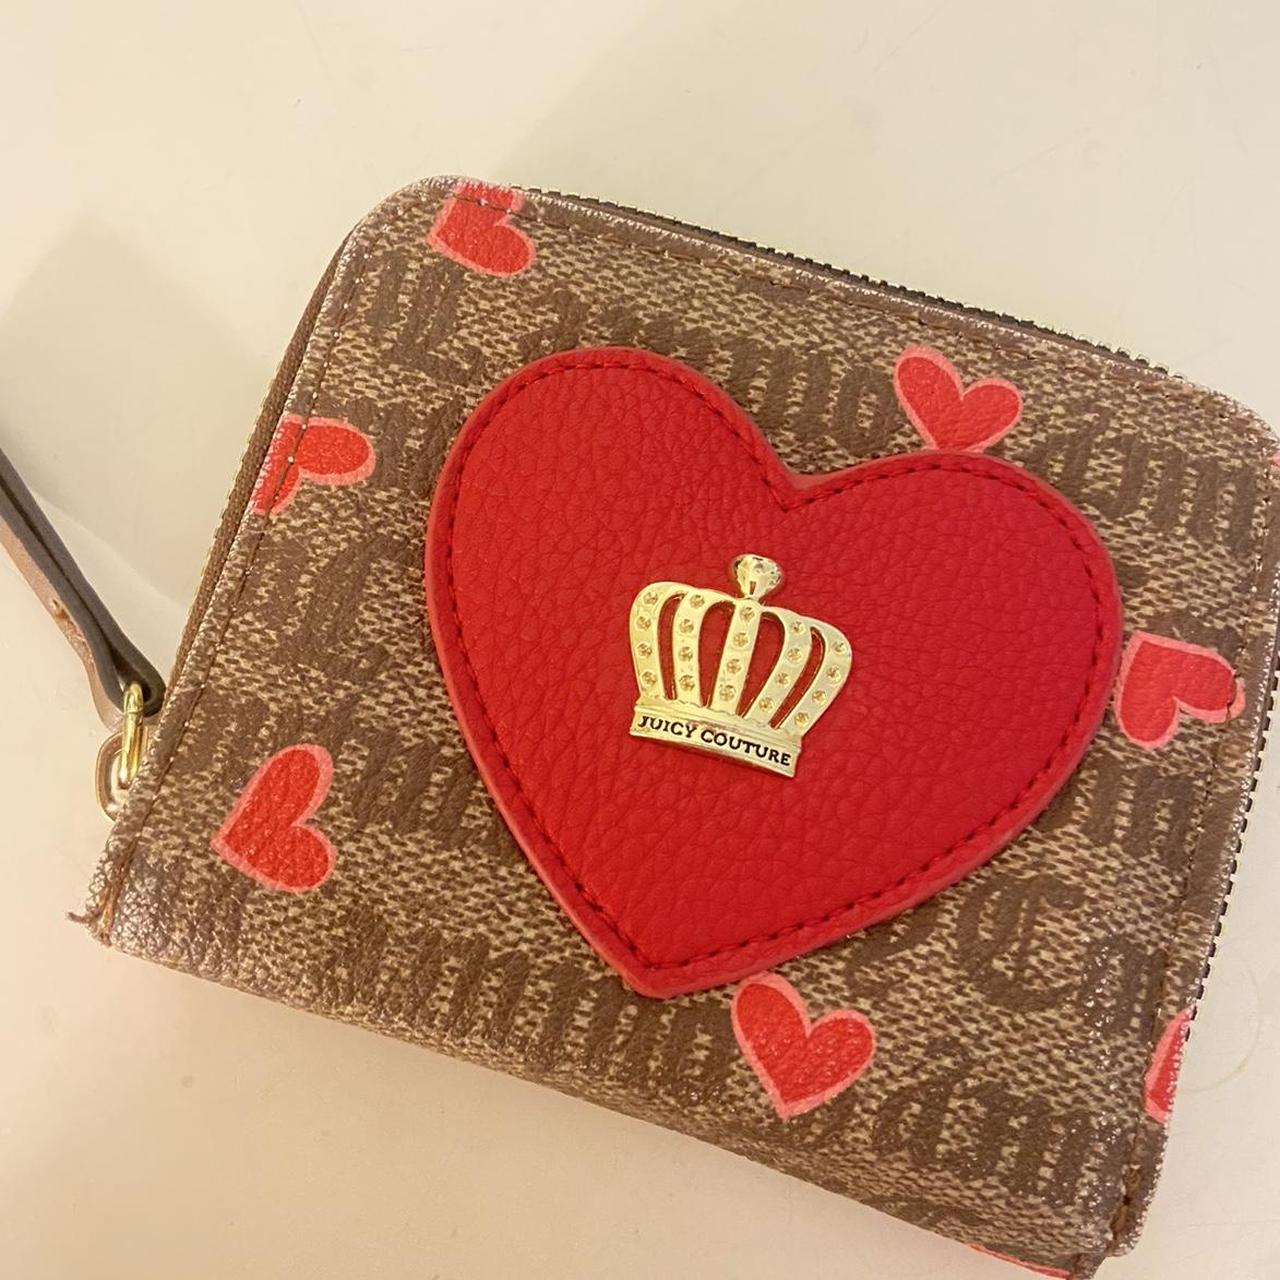 Juicy Couture Red Heart Coin Purse